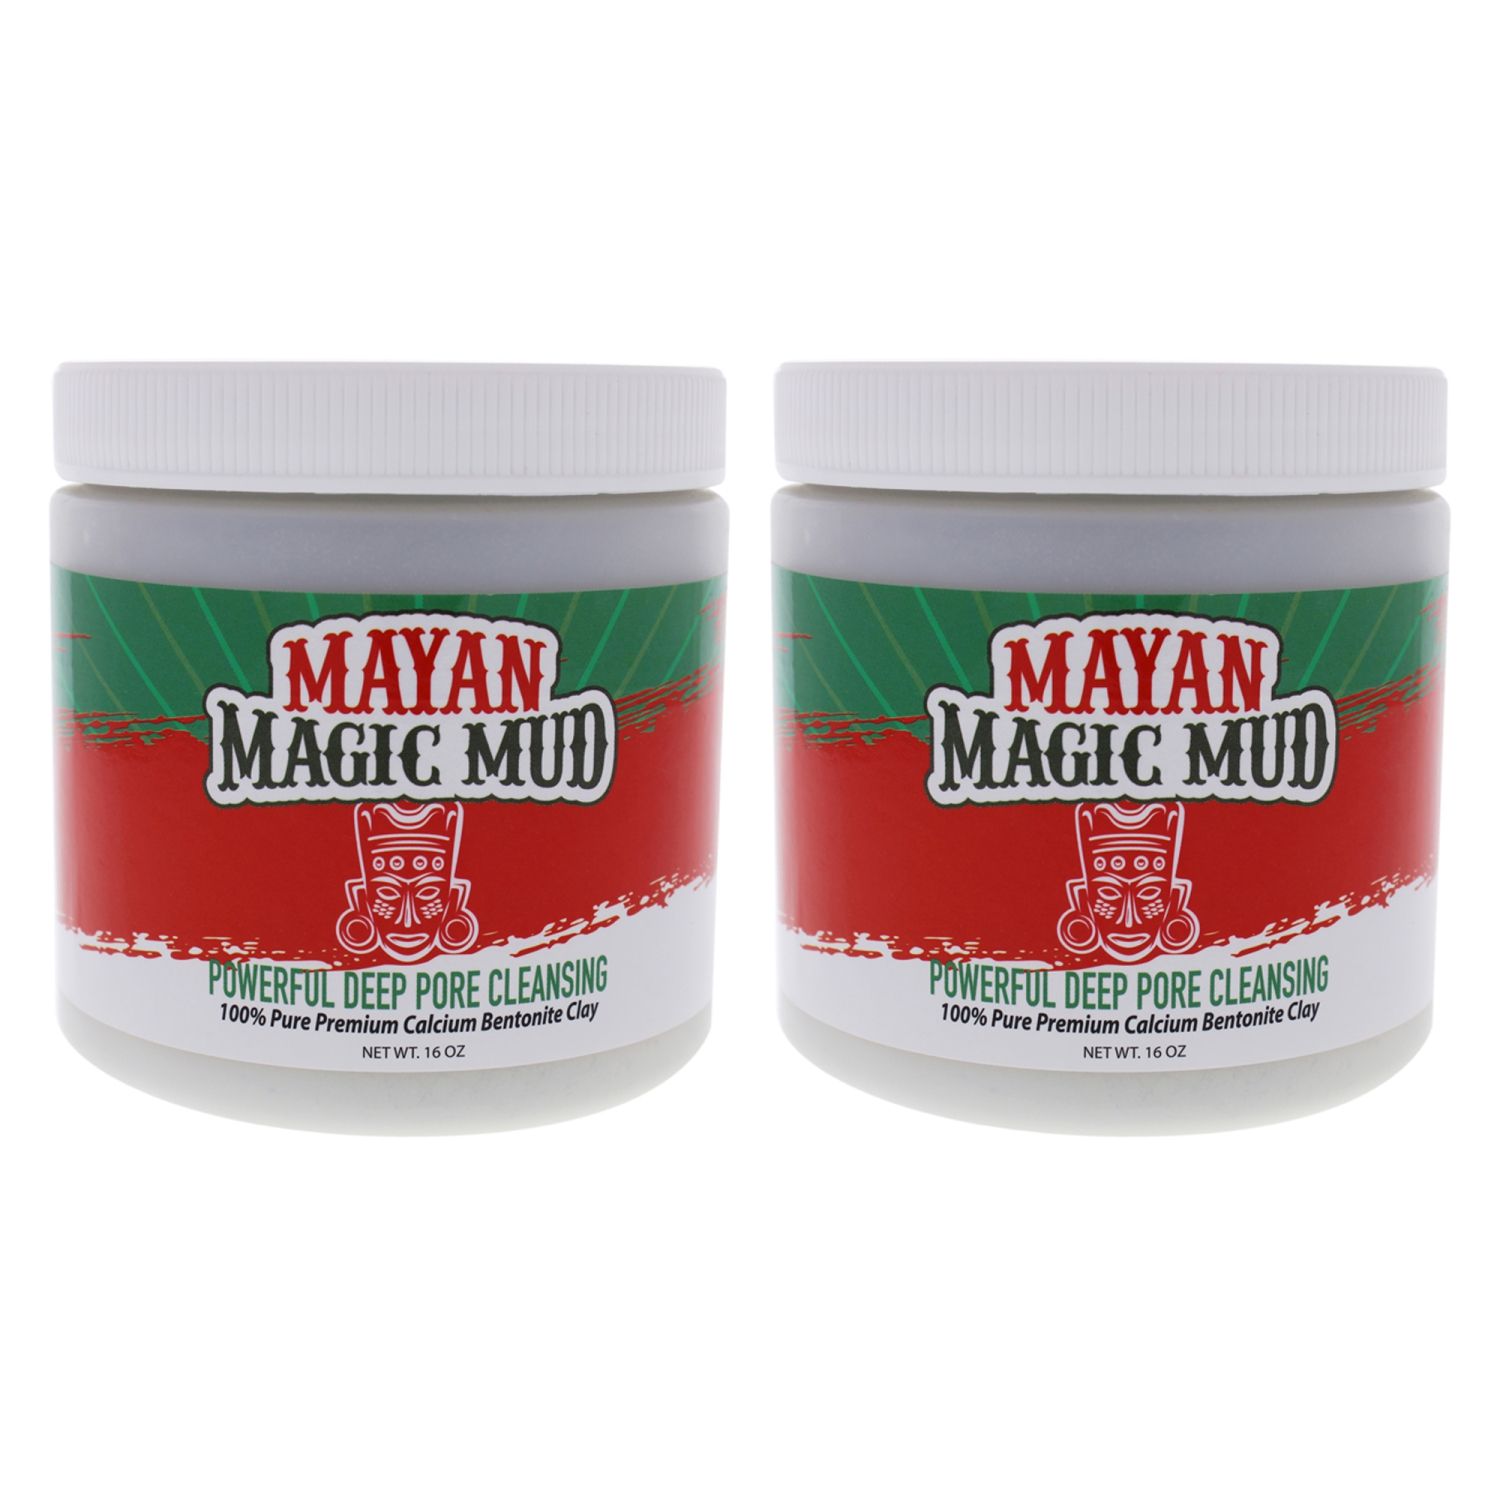 Powerful Deep Pore Cleansing Clay - Pack of 2 by Mayan Magic Mud for Unisex - 16 oz Cleanser